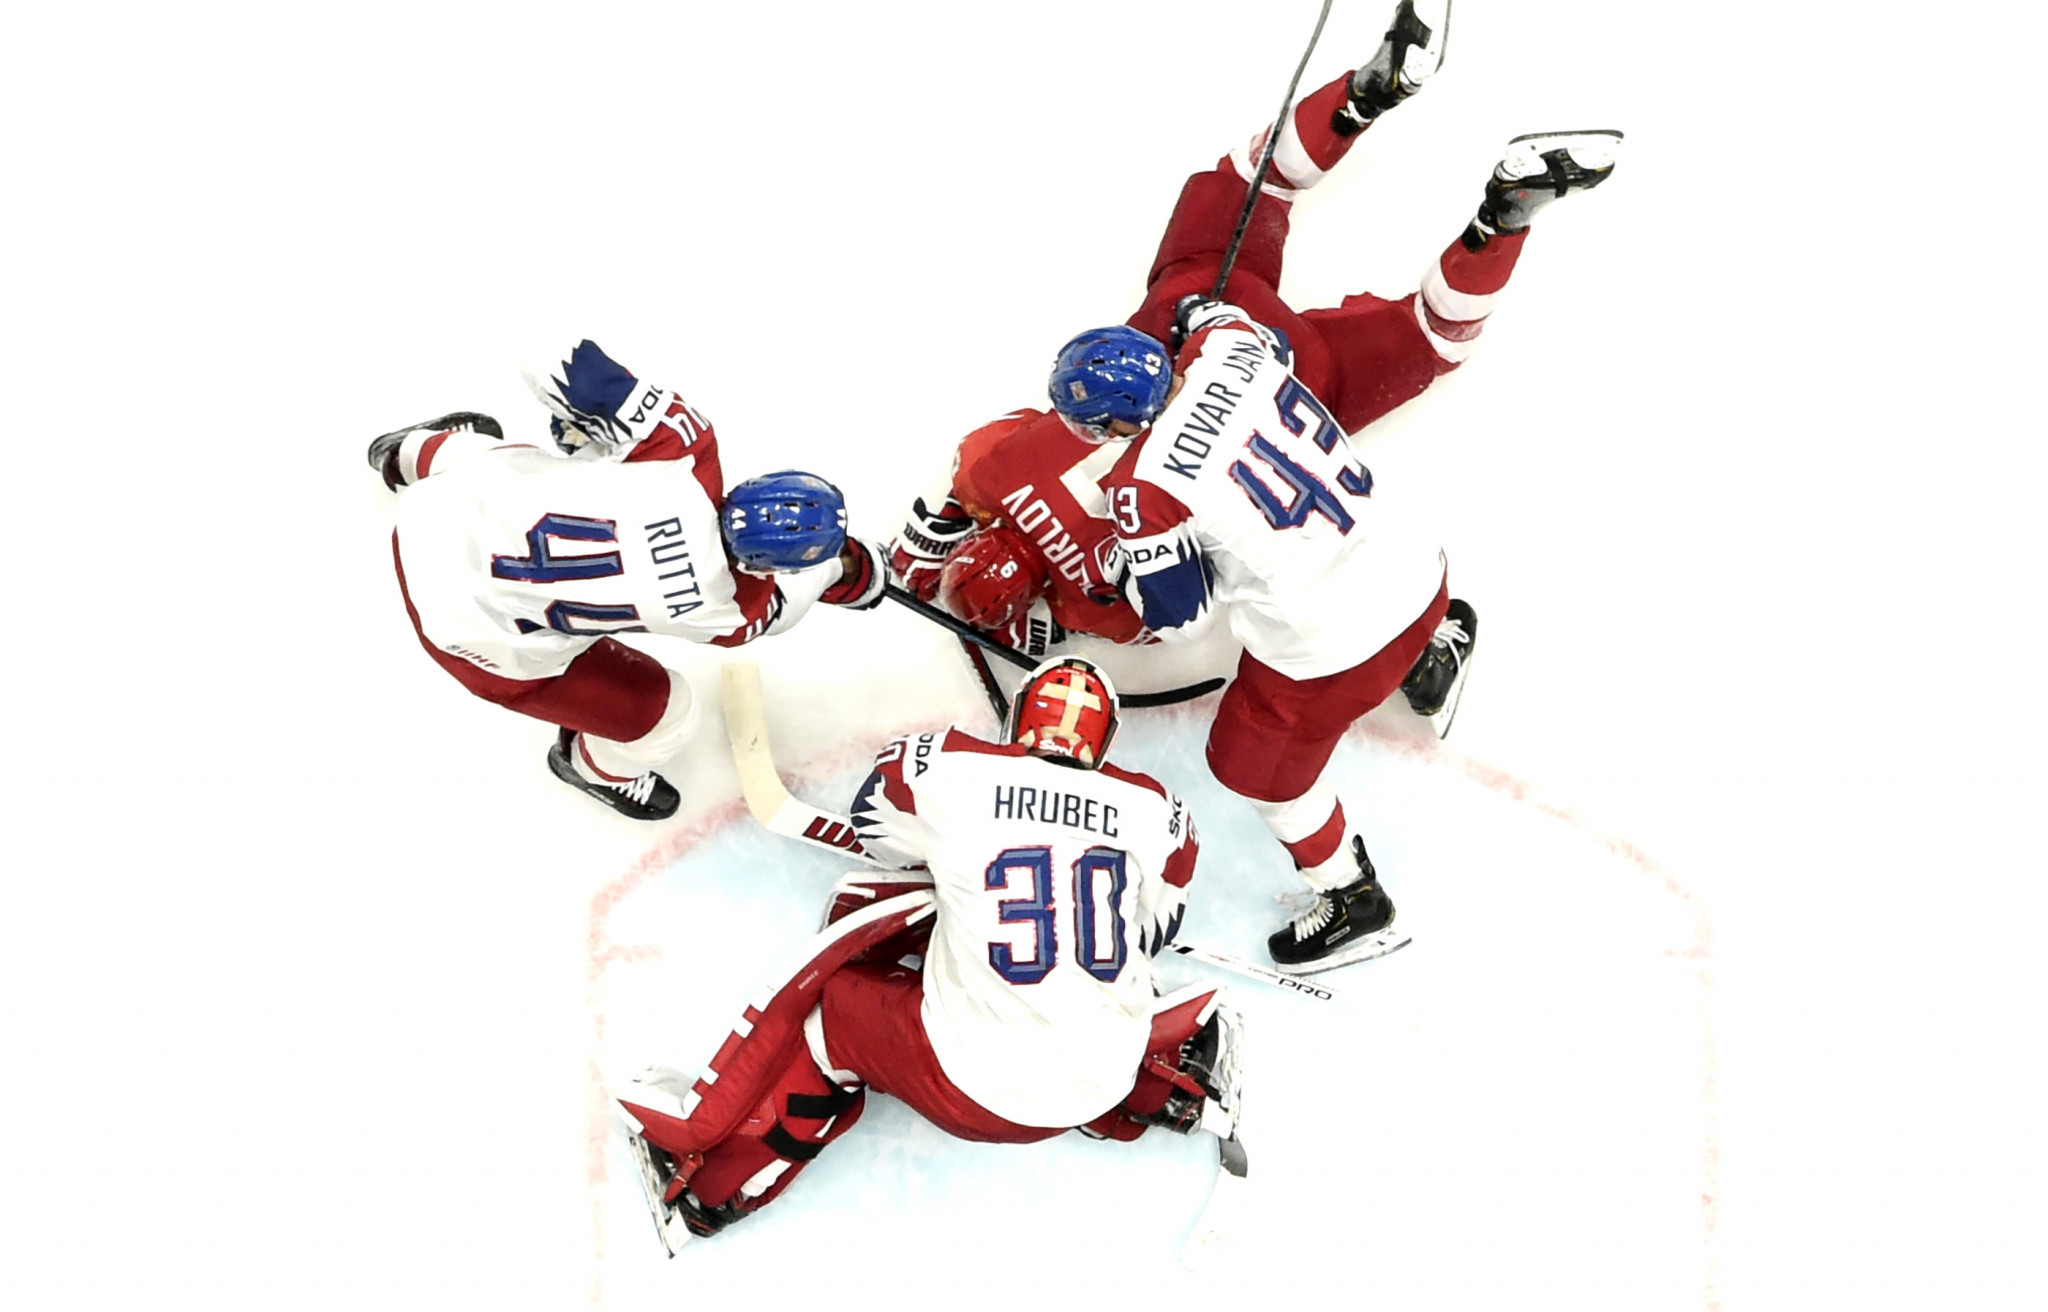 Czech Republic finished fourth at last month's IIHF World Championship after losing to Russia in the bronze medal match ©Getty Images